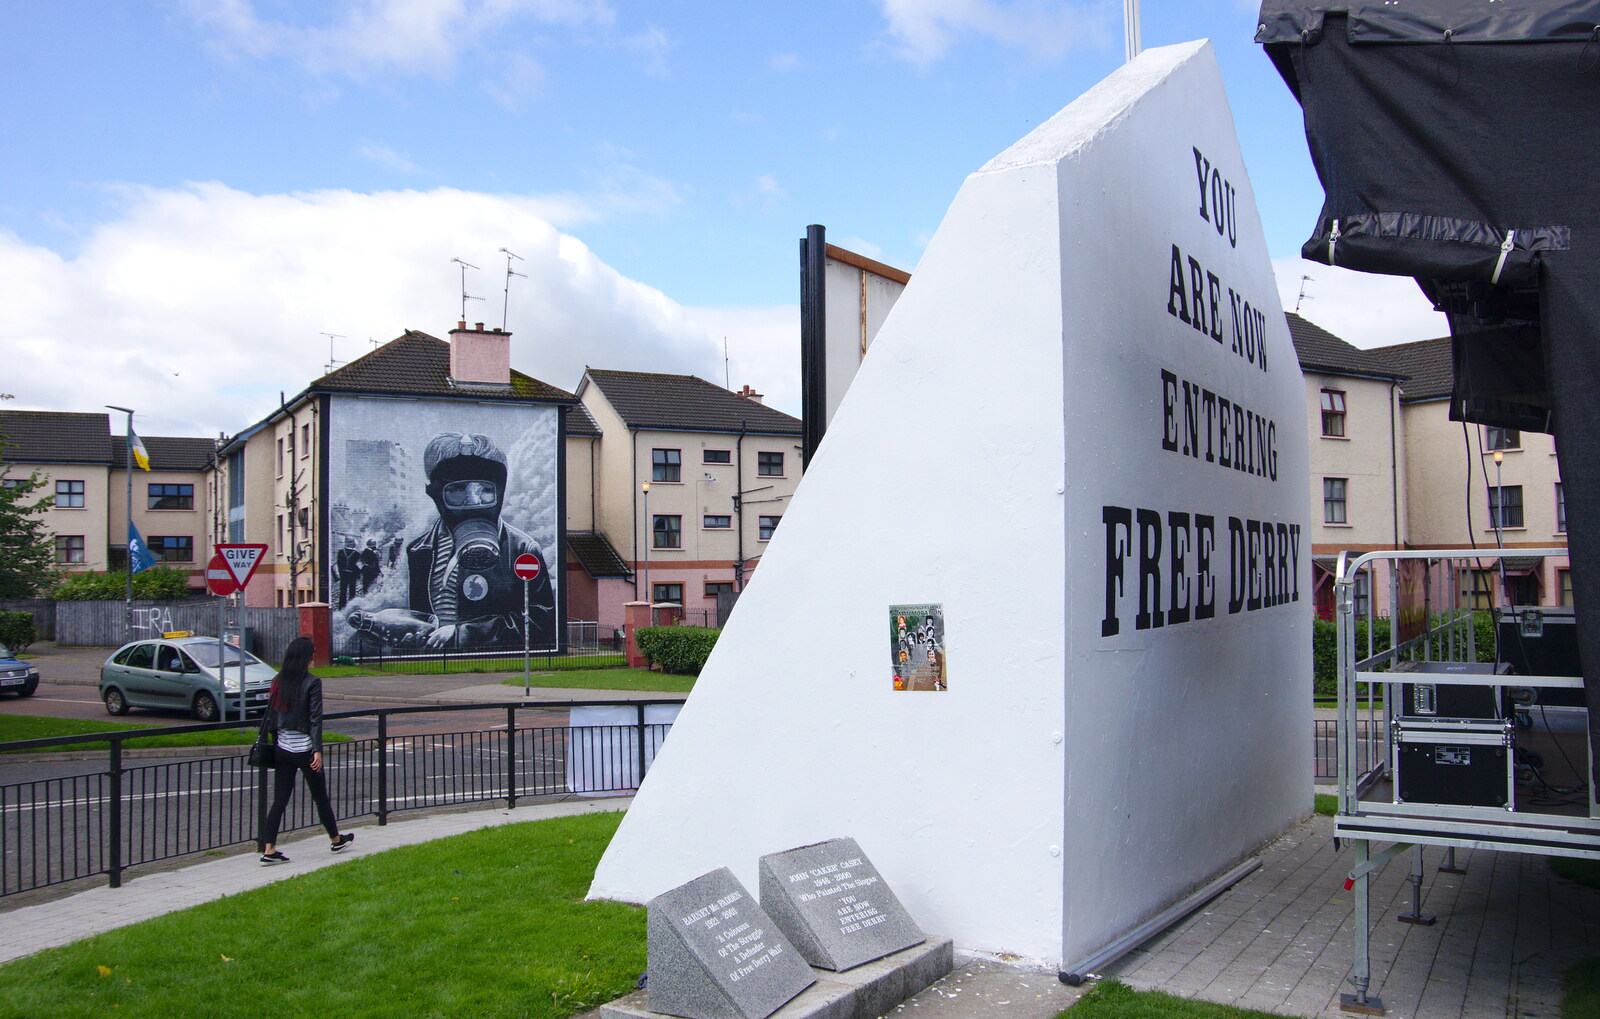 The famous 'Free Derry' sign is a bit blocked from A Day in Derry, County Londonderry, Northern Ireland - 15th August 2019